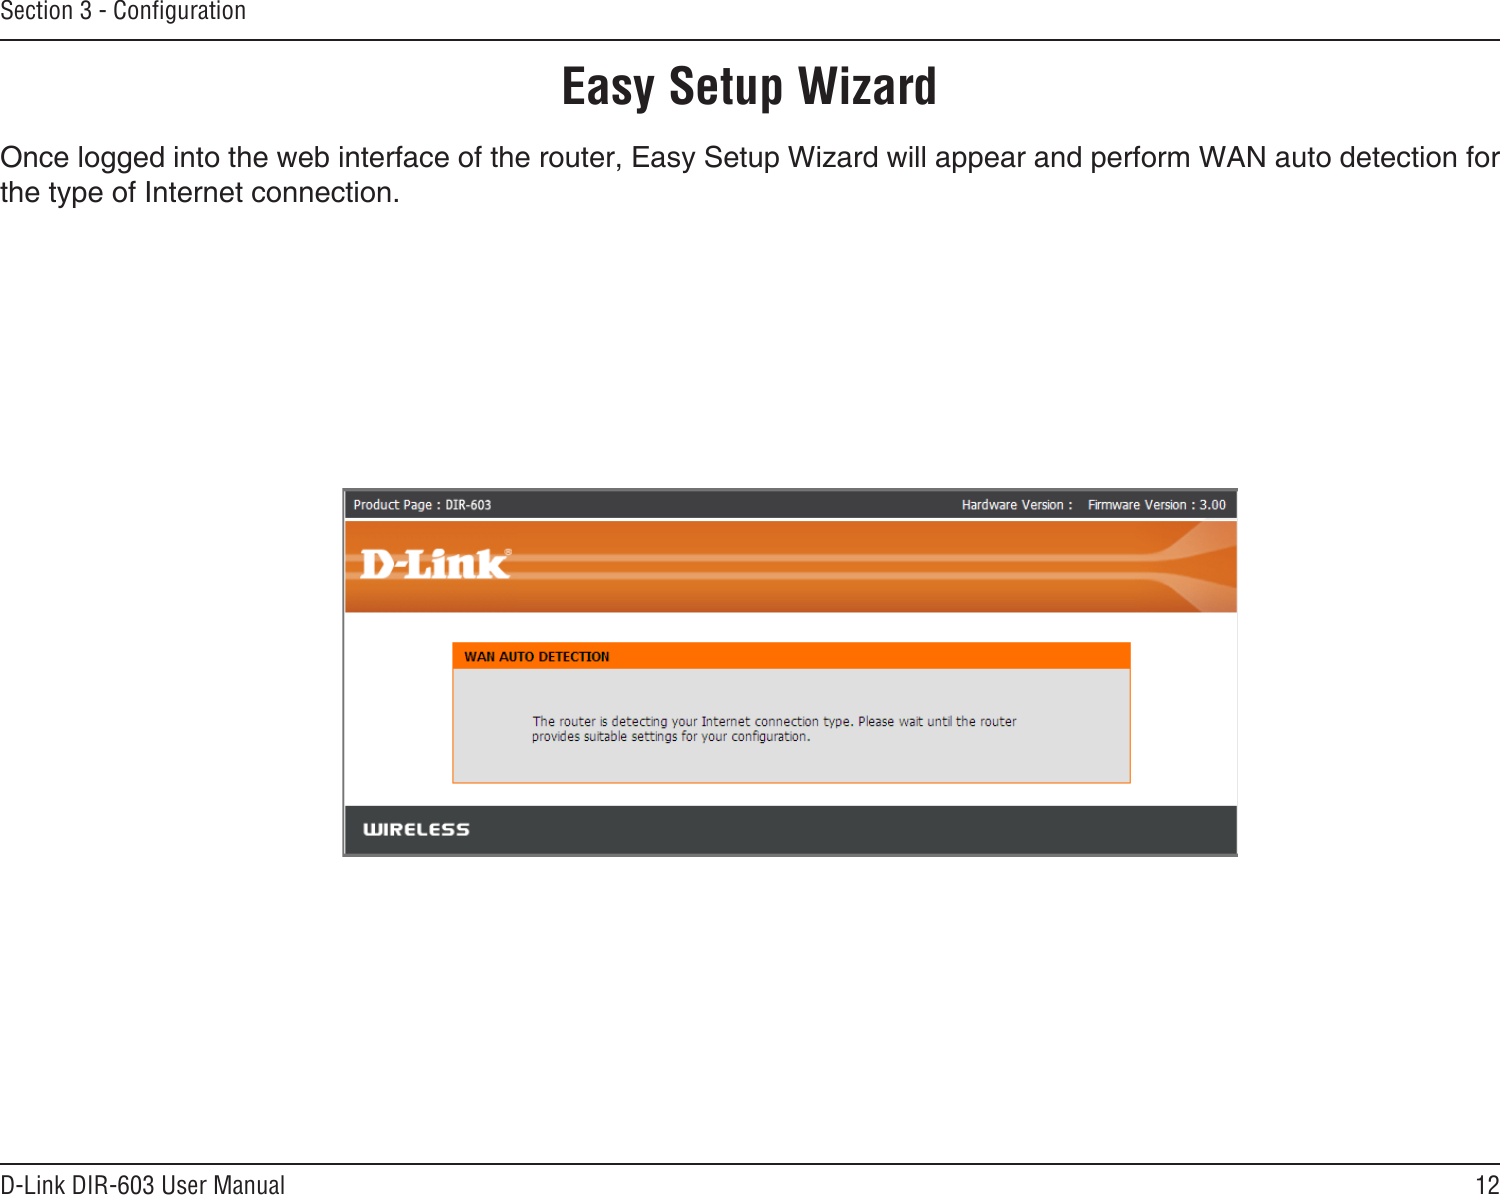 12D-Link DIR-603 User ManualSection 3 - CongurationEasy Setup WizardOnce logged into the web interface of the router, Easy Setup Wizard will appear and perform WAN auto detection for the type of Internet connection.